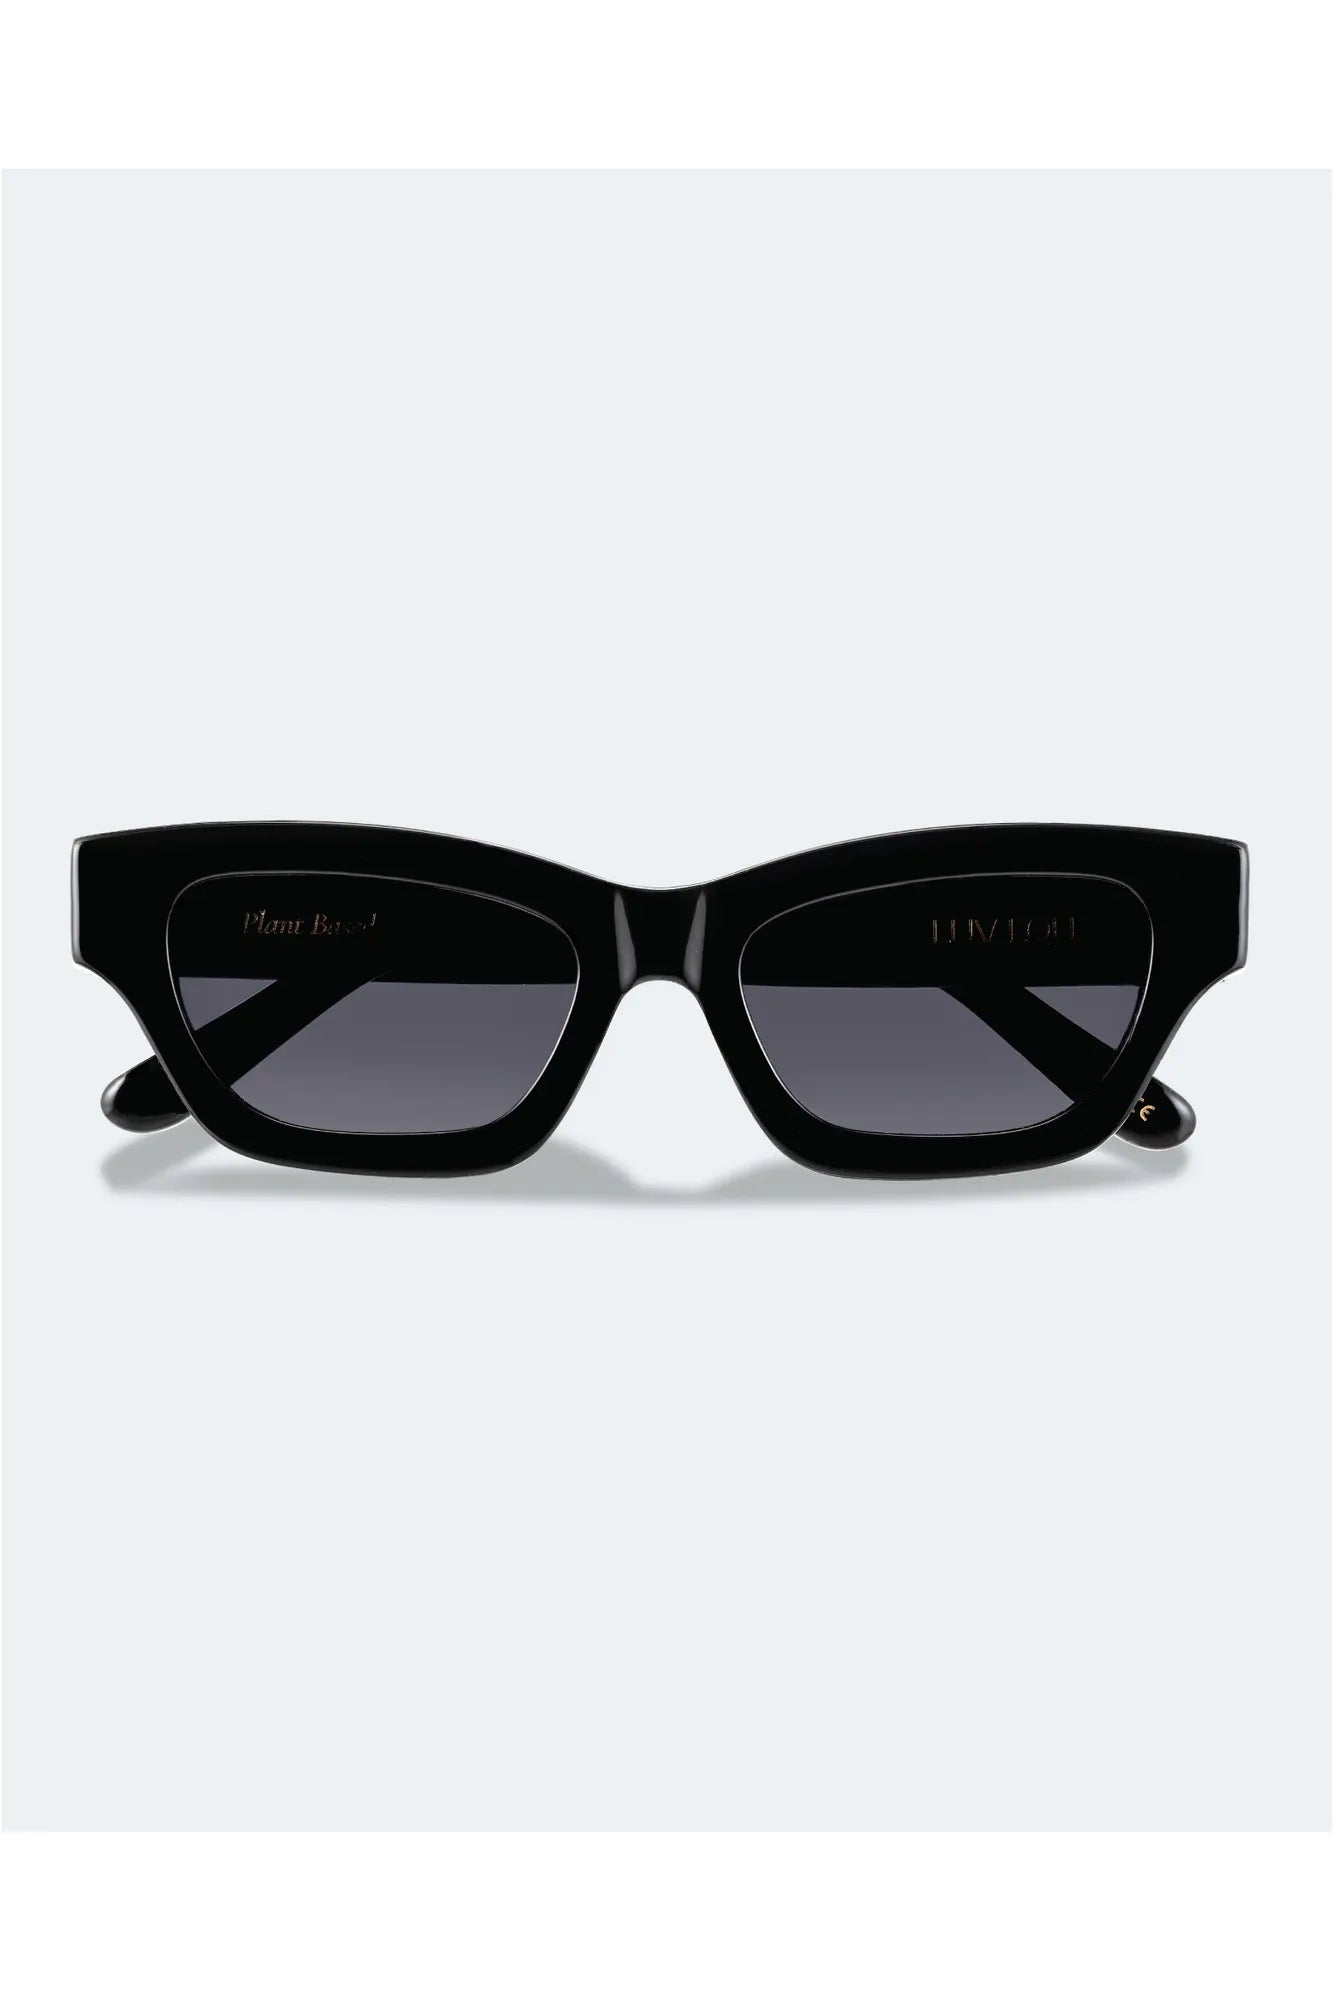 The Carmel Sunglasses in Black by Luv Lou